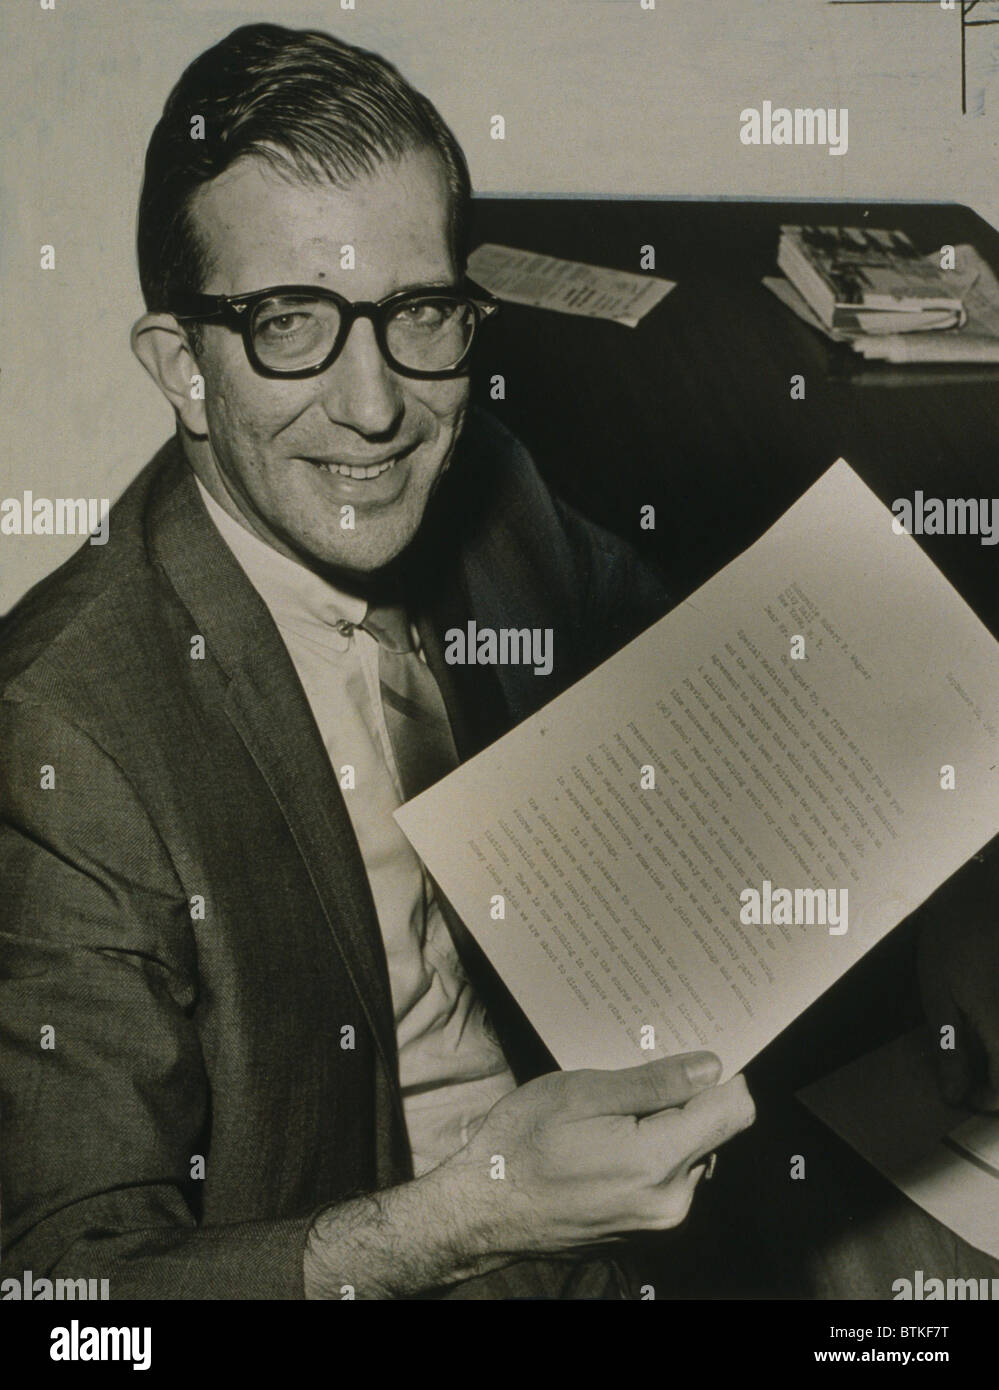 Albert Shanker (1928-1997), leader of the New York City teachers union, threatened to strike during contract negotiations, holding a report issued by mediators in 1965. His militancy was the basis of a joke in Woody Allen's 1973 movie, SLEEPER. Shanker, holds report issued by mediators in 1965. Stock Photo